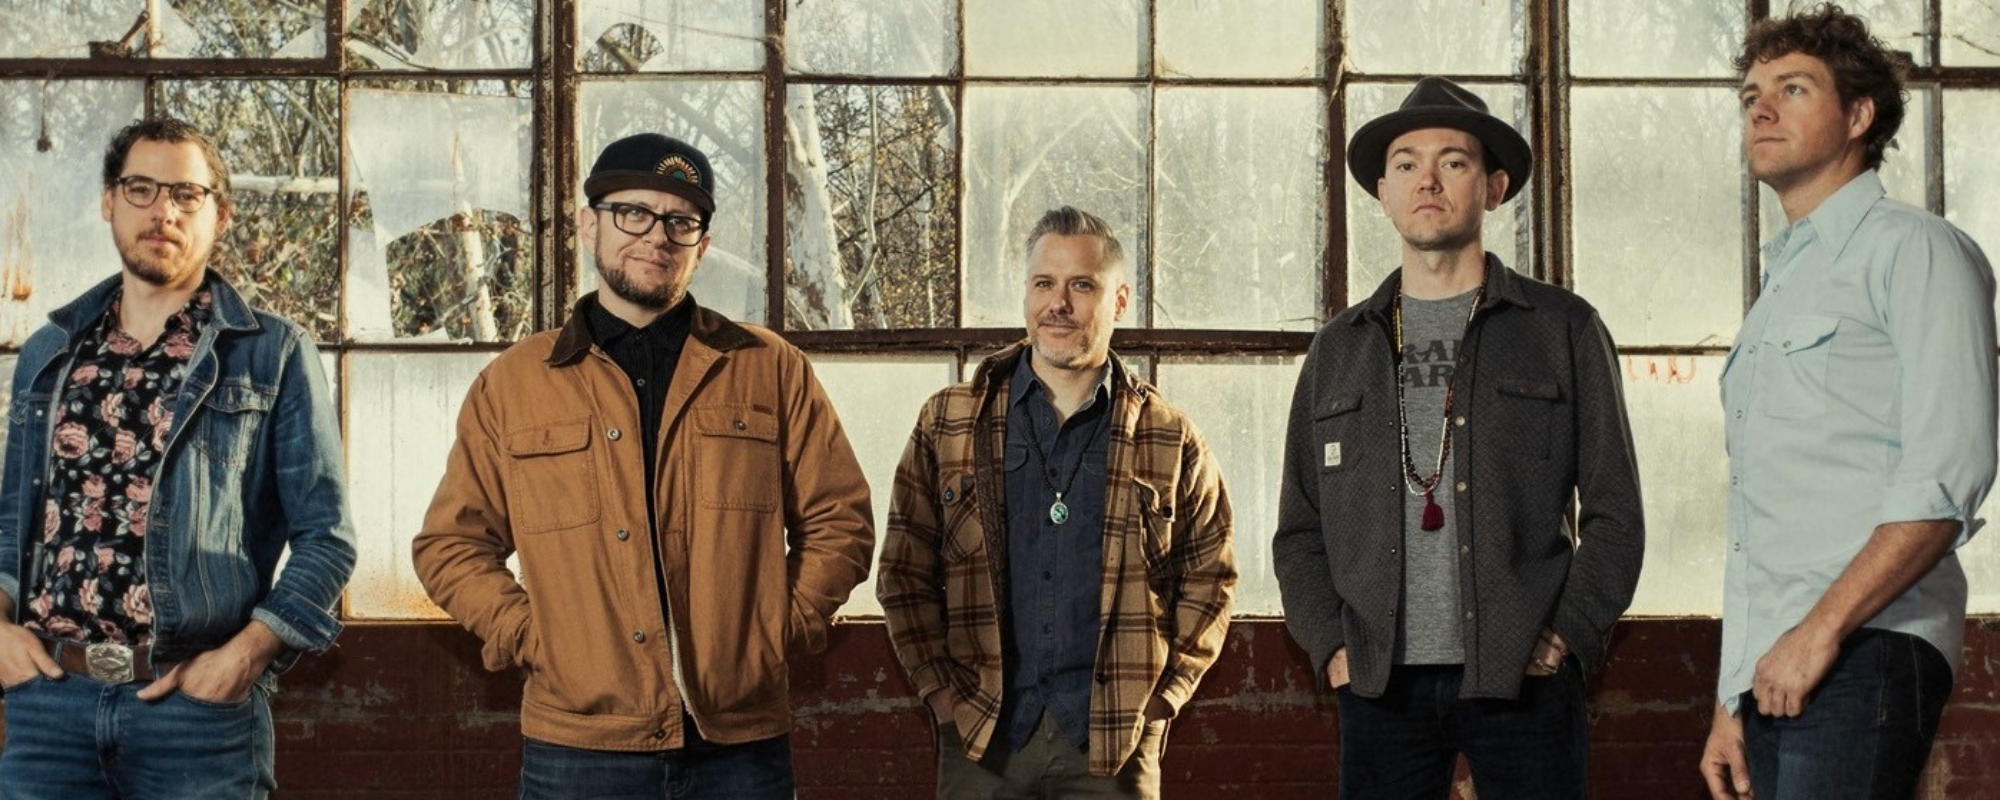 Pioneering Bluegrass Group, The Infamous Stringdusters Pay Homage to Bill Monroe with New Tribute Album